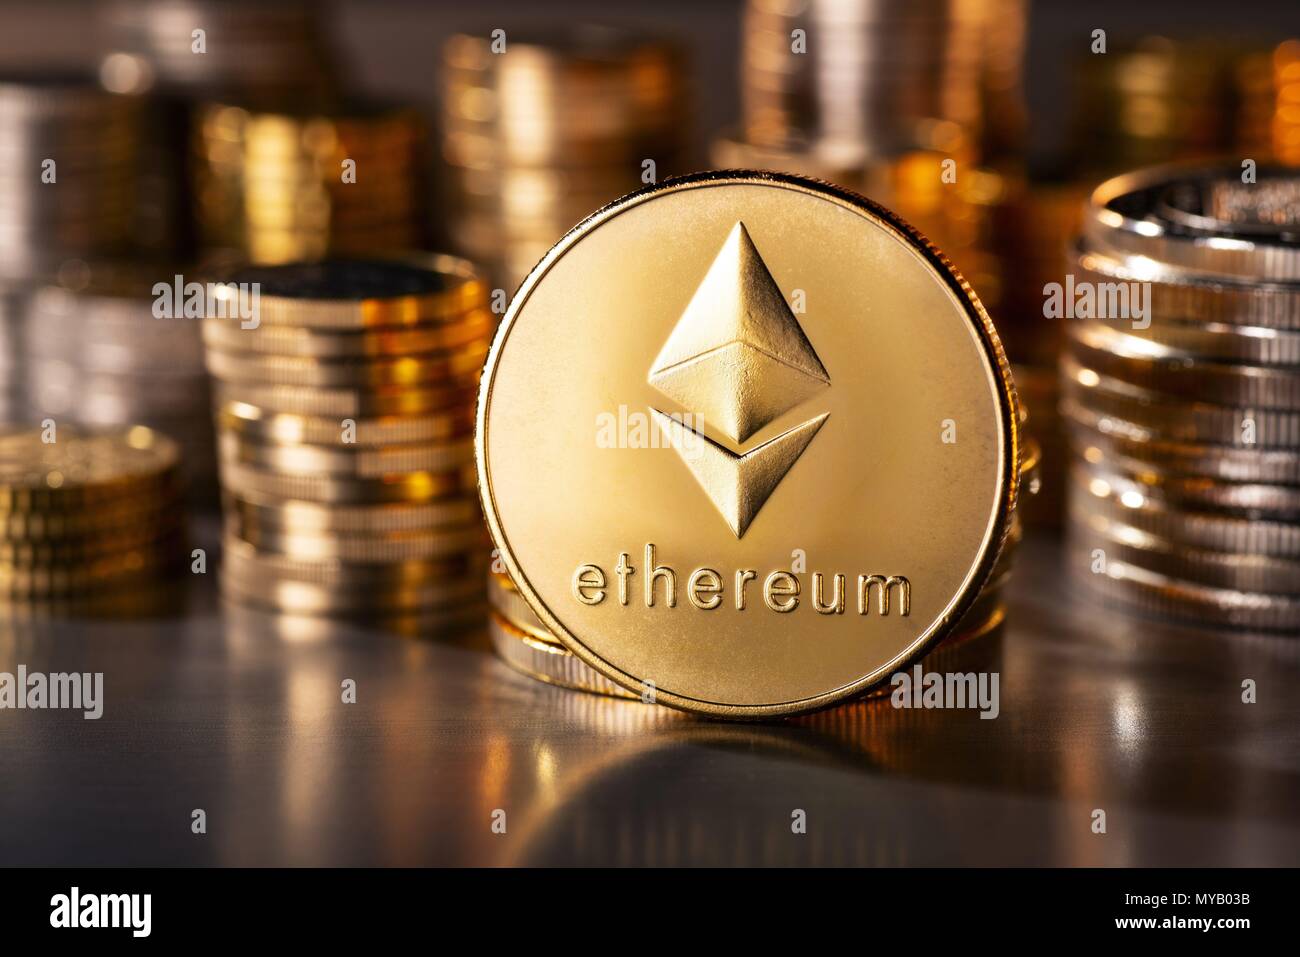 Cryptocurrency coin Ethereum with several stacks of coins in the background | usage worldwide Stock Photo